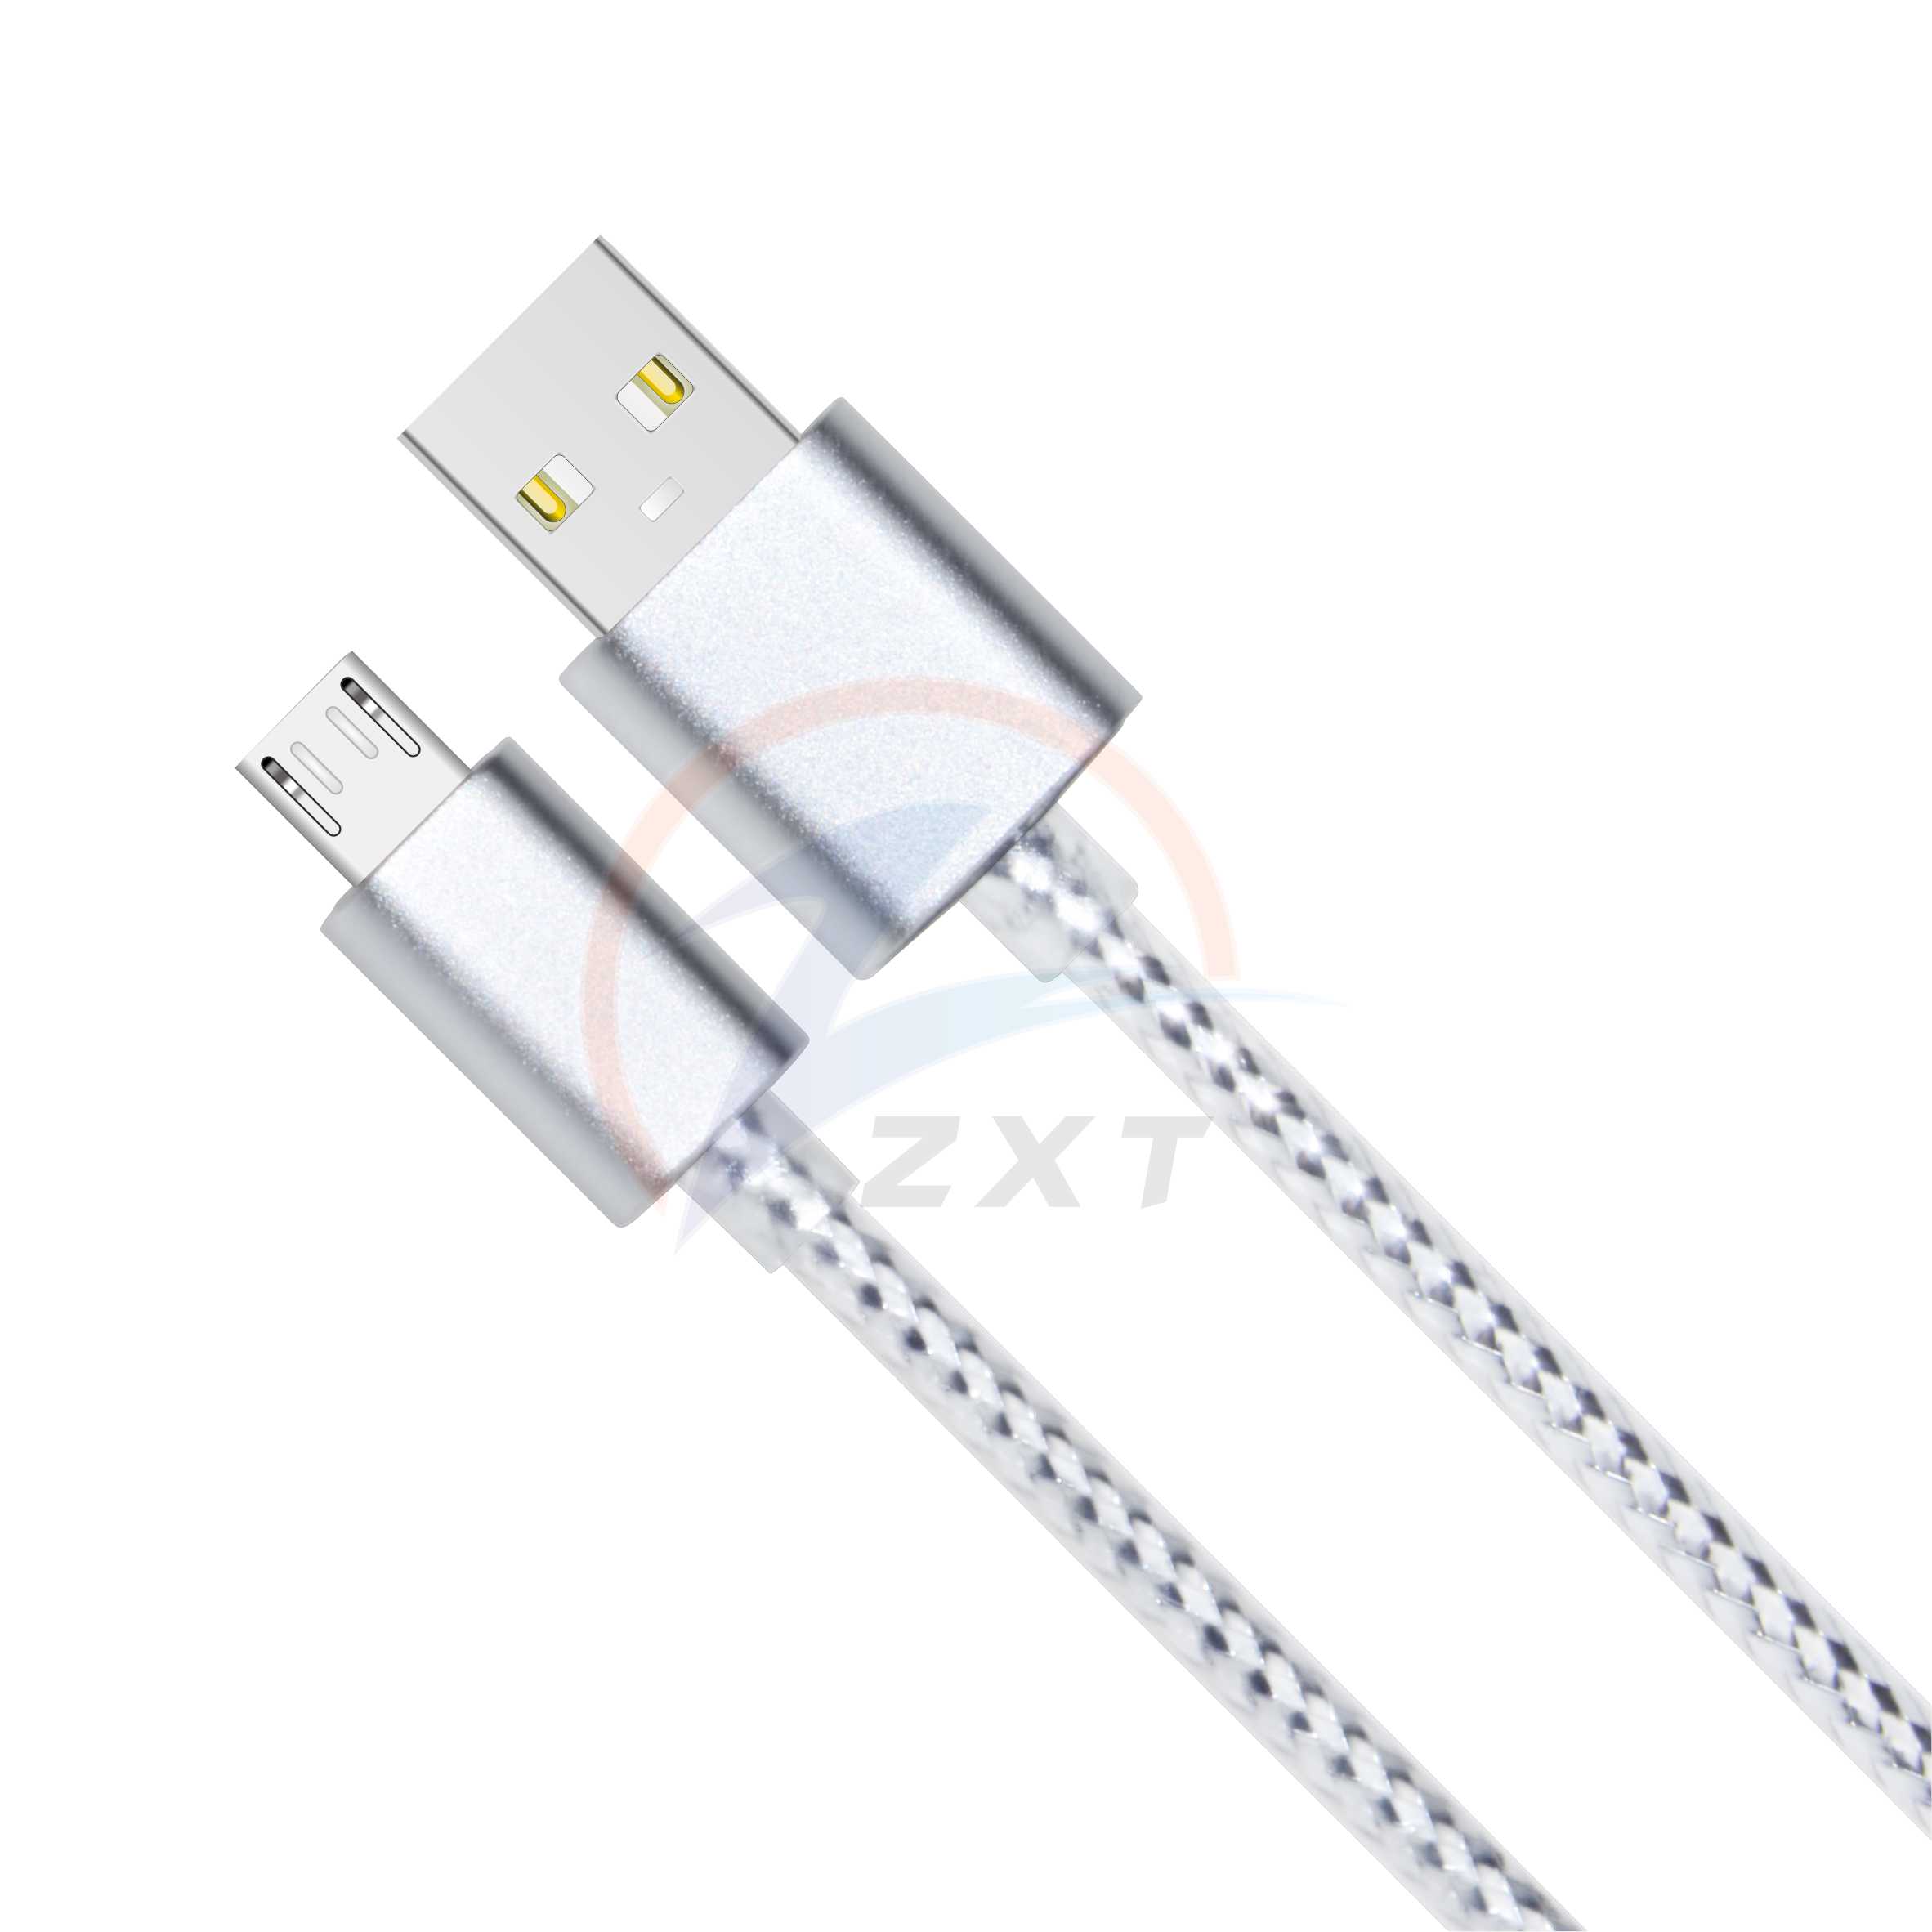 Alluminum Alloy Jelly USB Cable